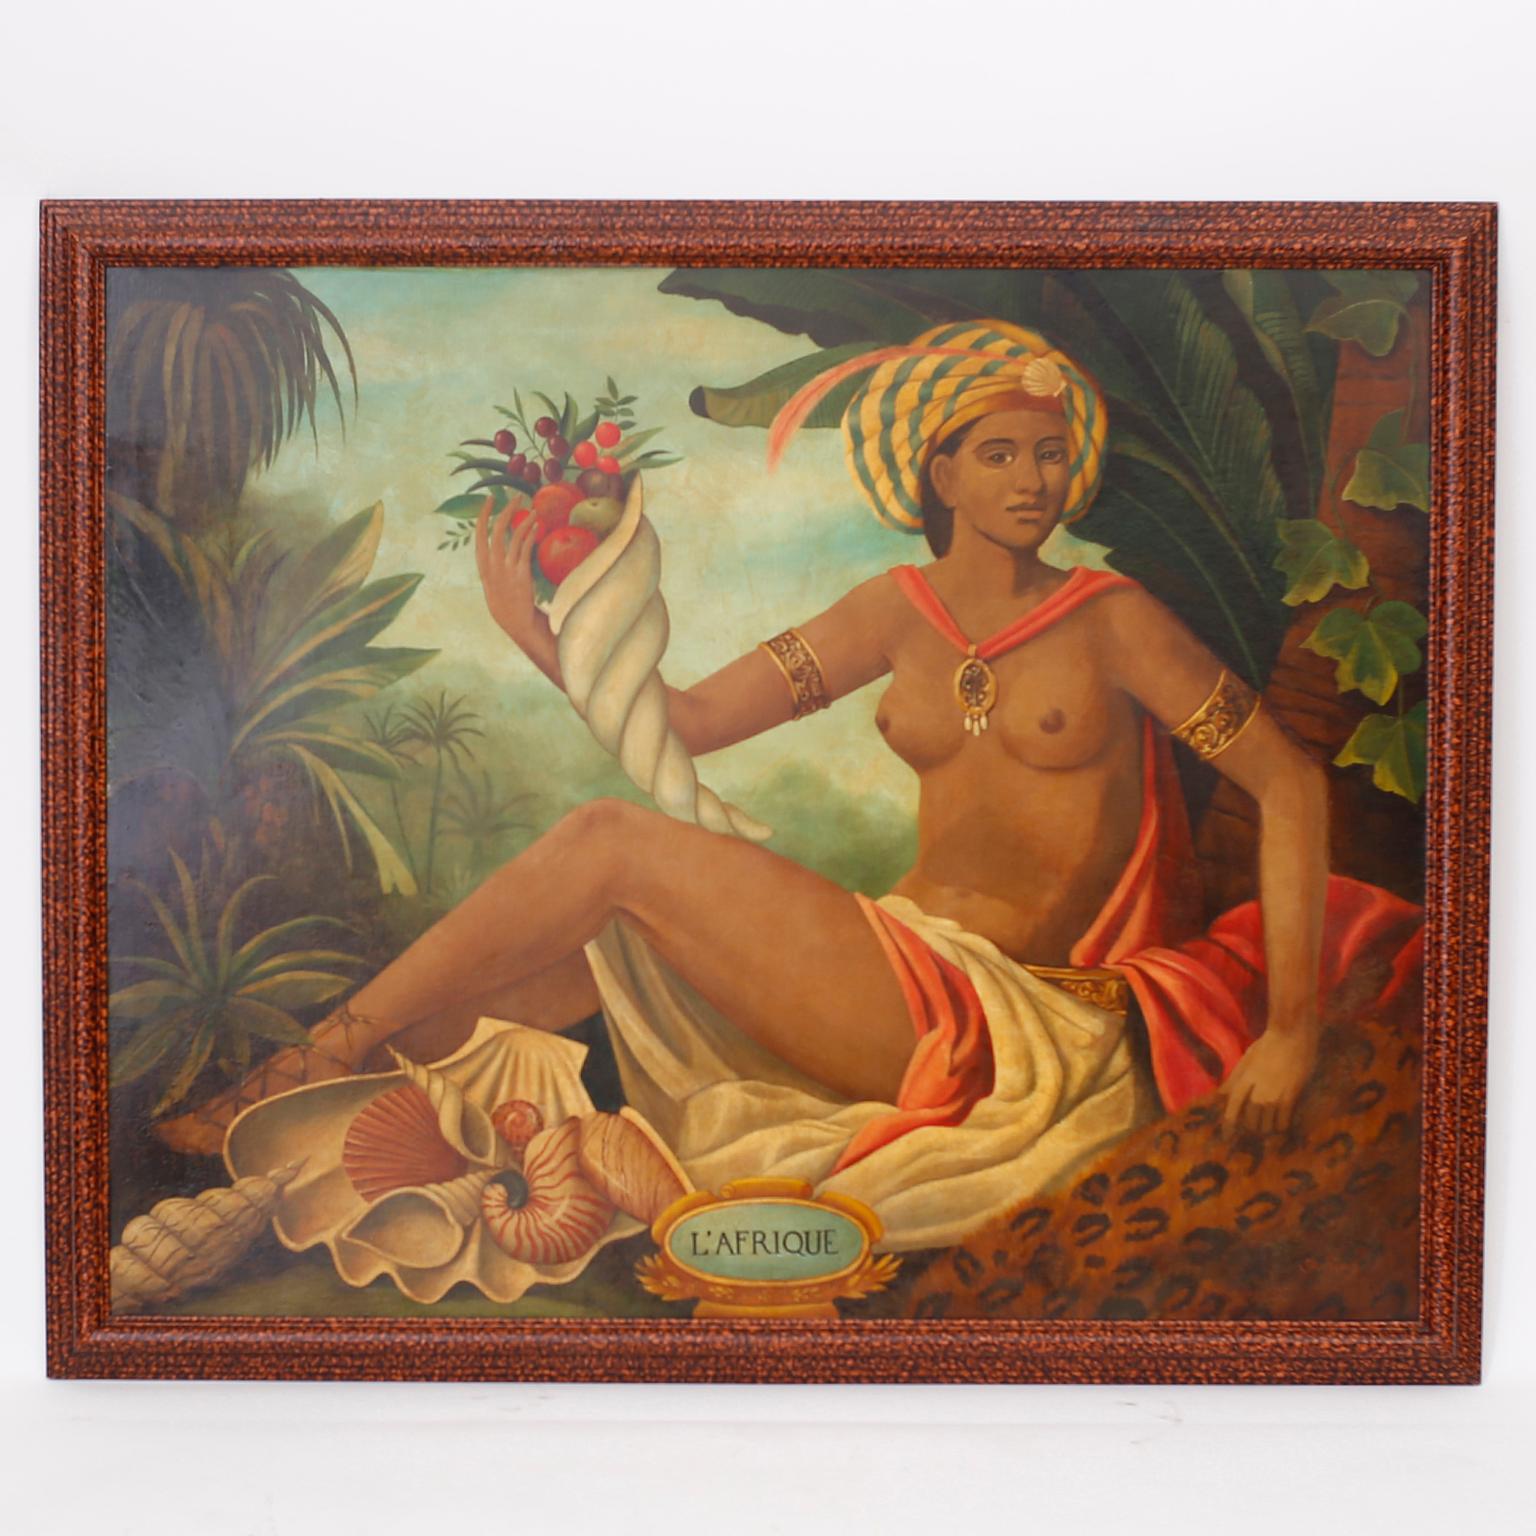 Pair of Oil Paintings of the Beauties L'Amerique and L'Afrique by Skilling 4